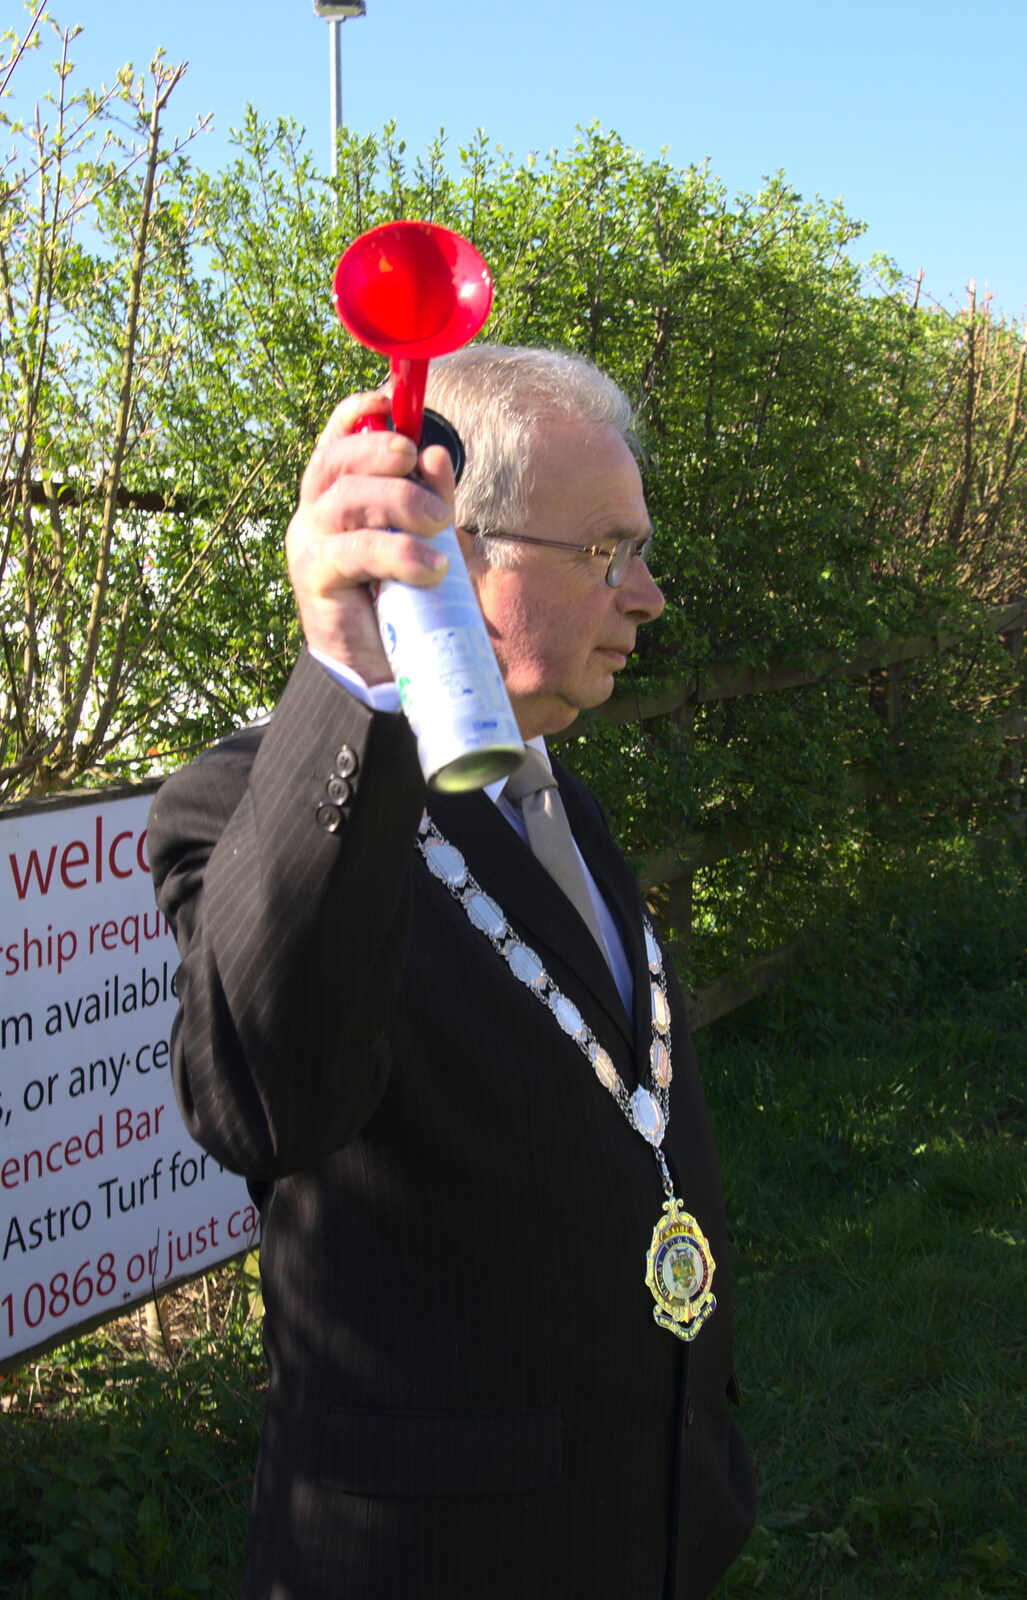 The mayor is ready for another start from The Black Dog Festival of Running, Bungay, Suffolk - 2nd April 2017